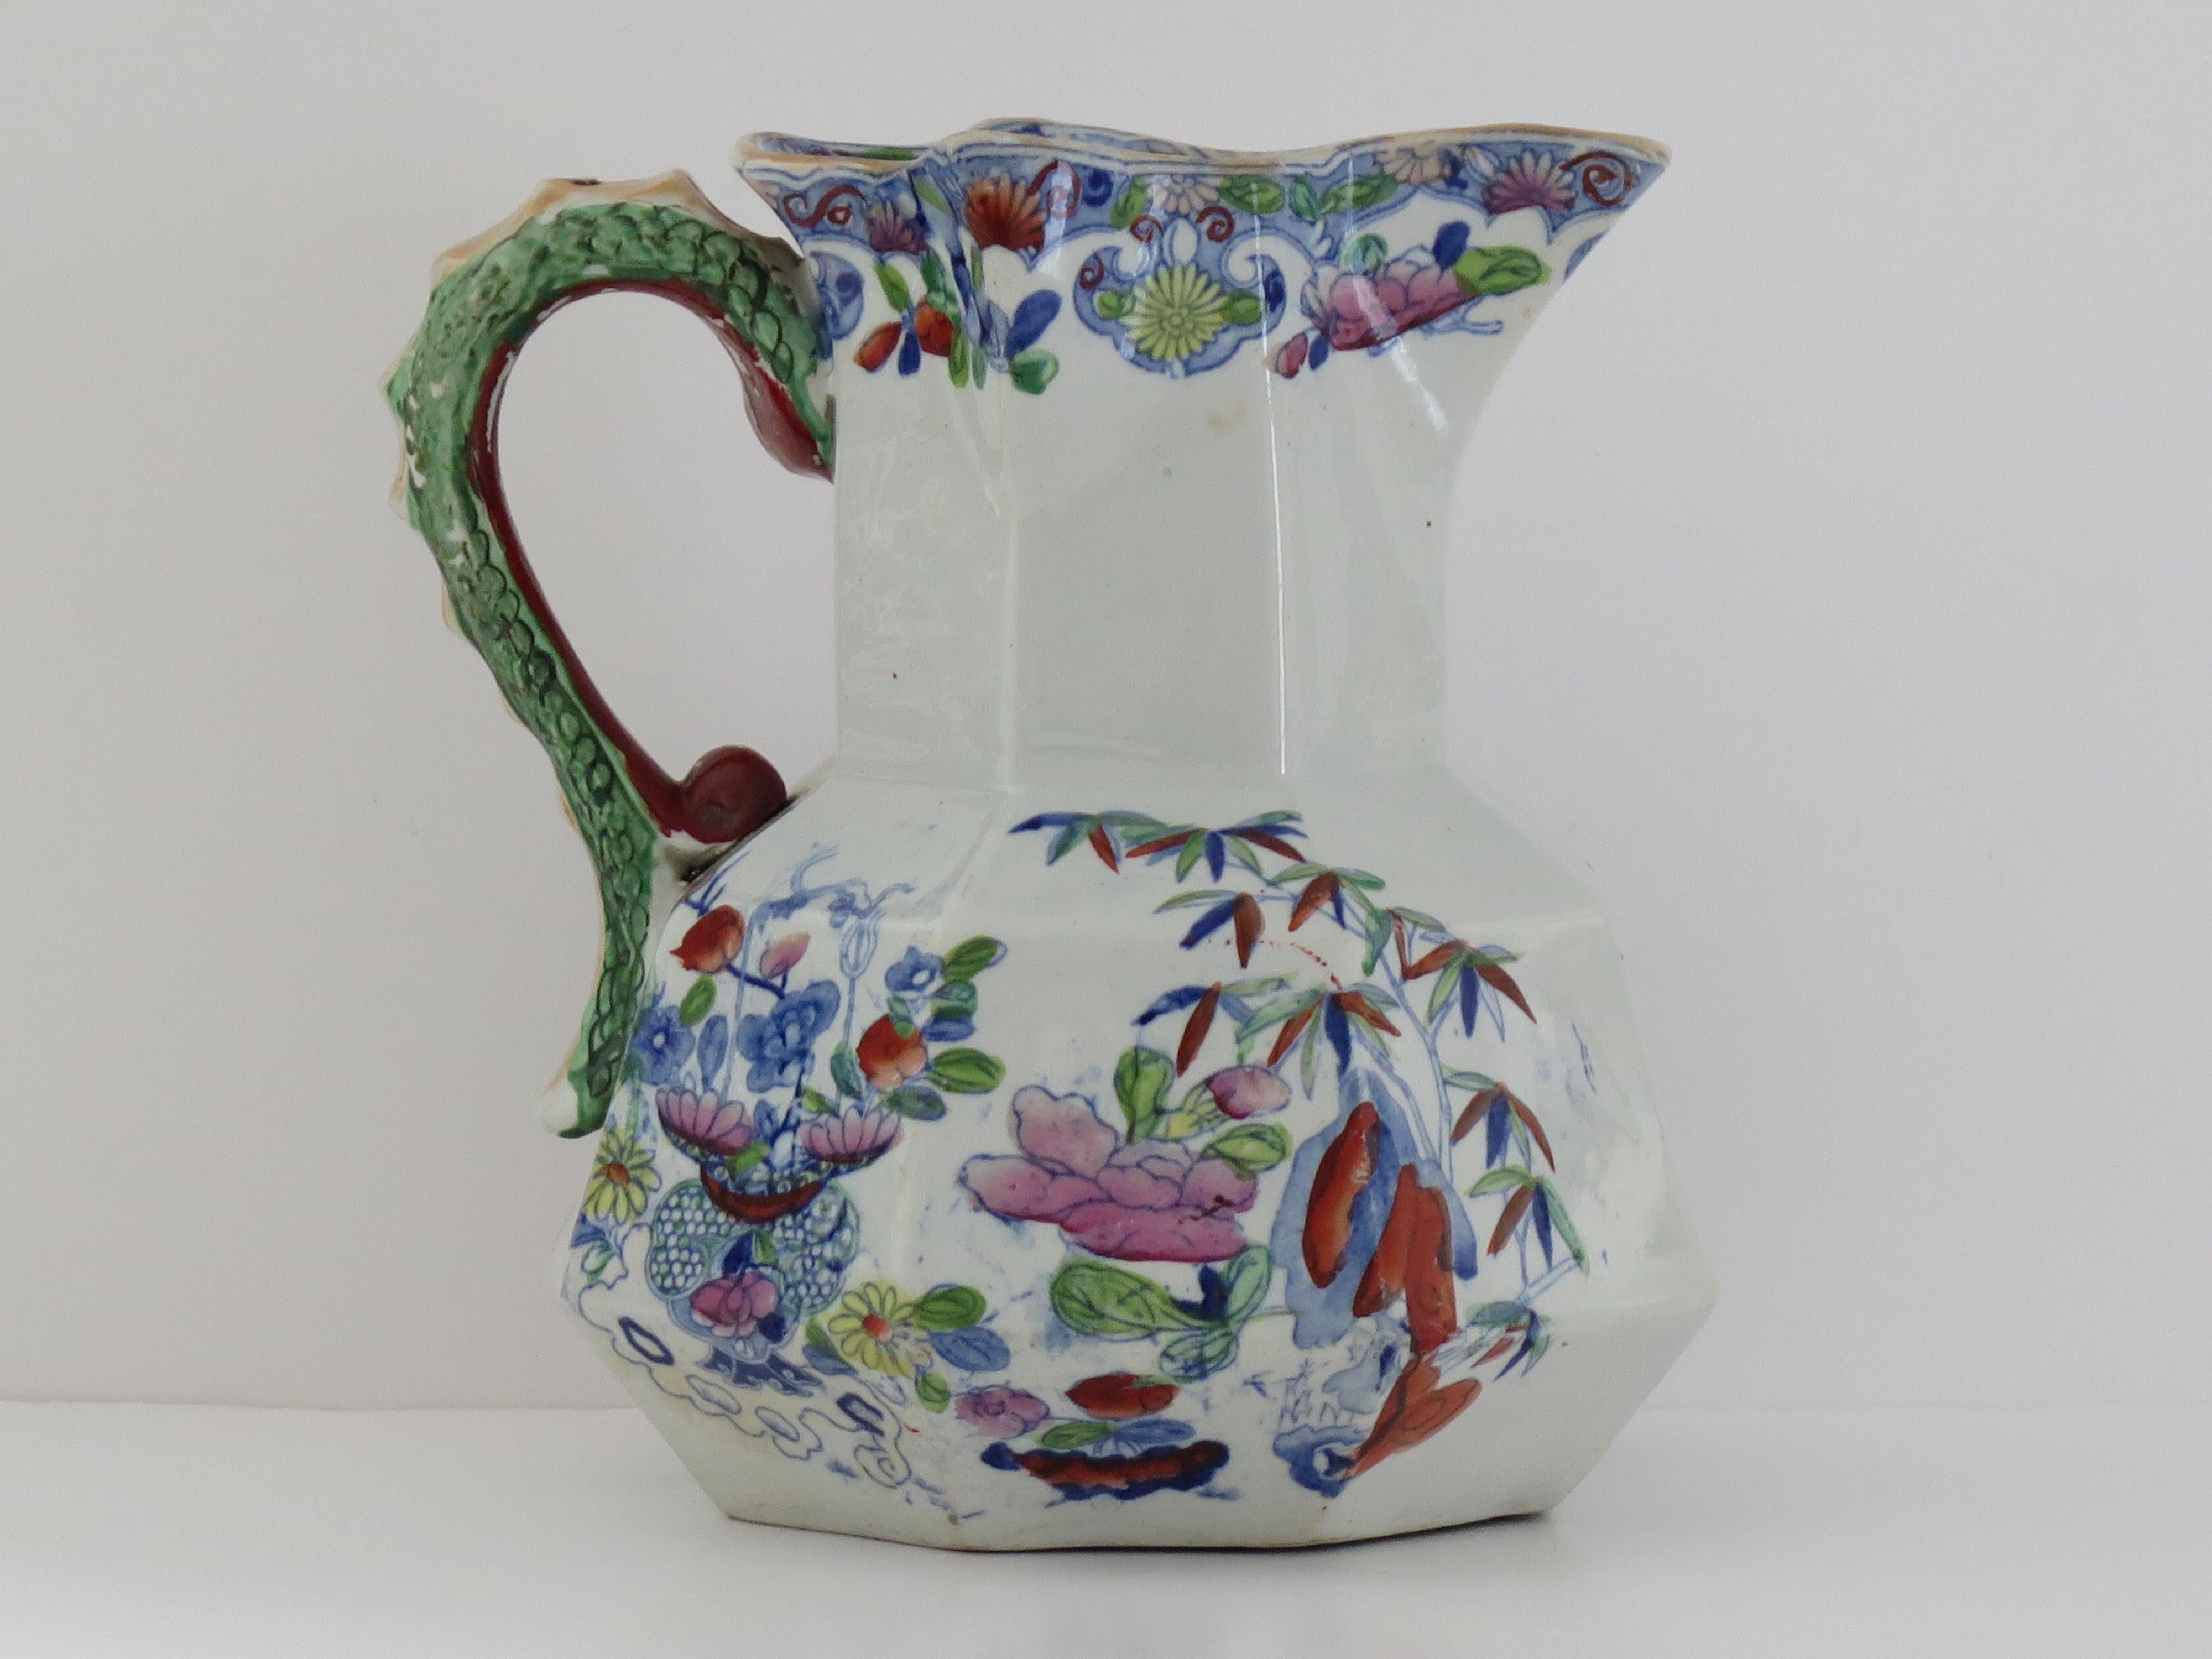 This is a good, very early Masons ironstone Large hydra jug or pitcher, dating to the early 19th century period of George 111, Circa 1818.

The jug is well potted in the octagonal hydra shape with a snake handle.

It has typical early Mason's